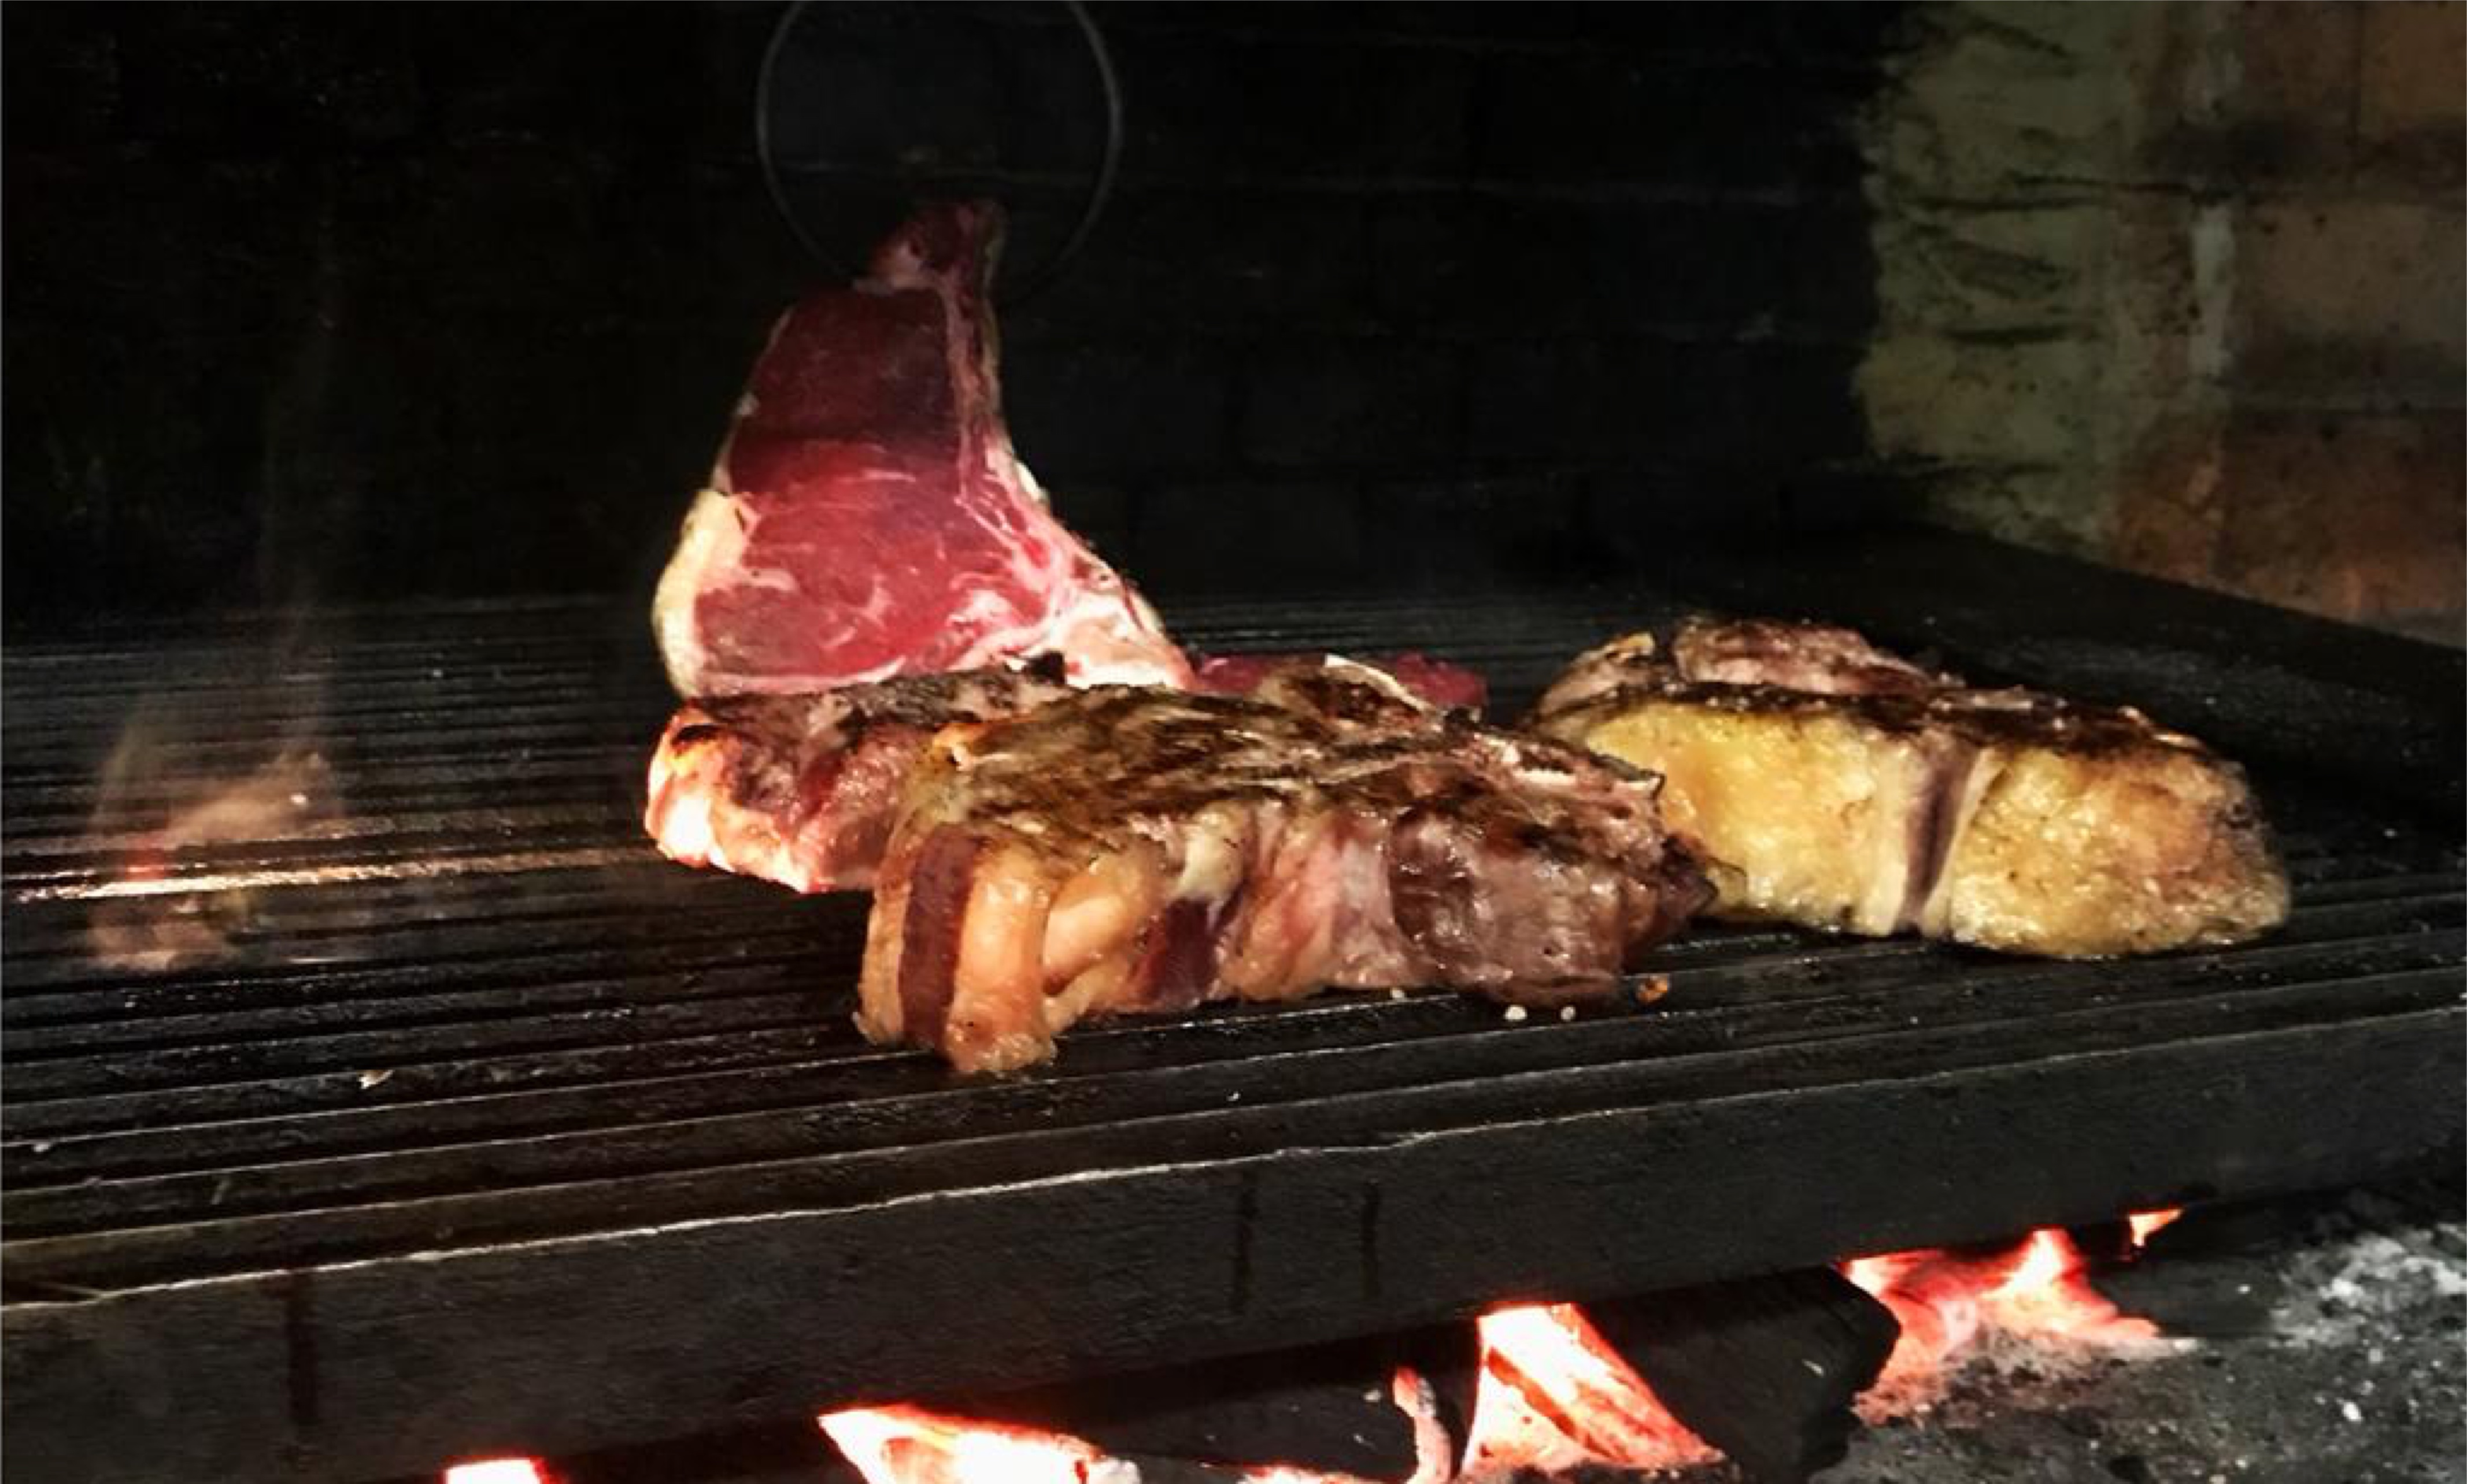 His majestic the Florentine T-Bone steak and where you can eat it